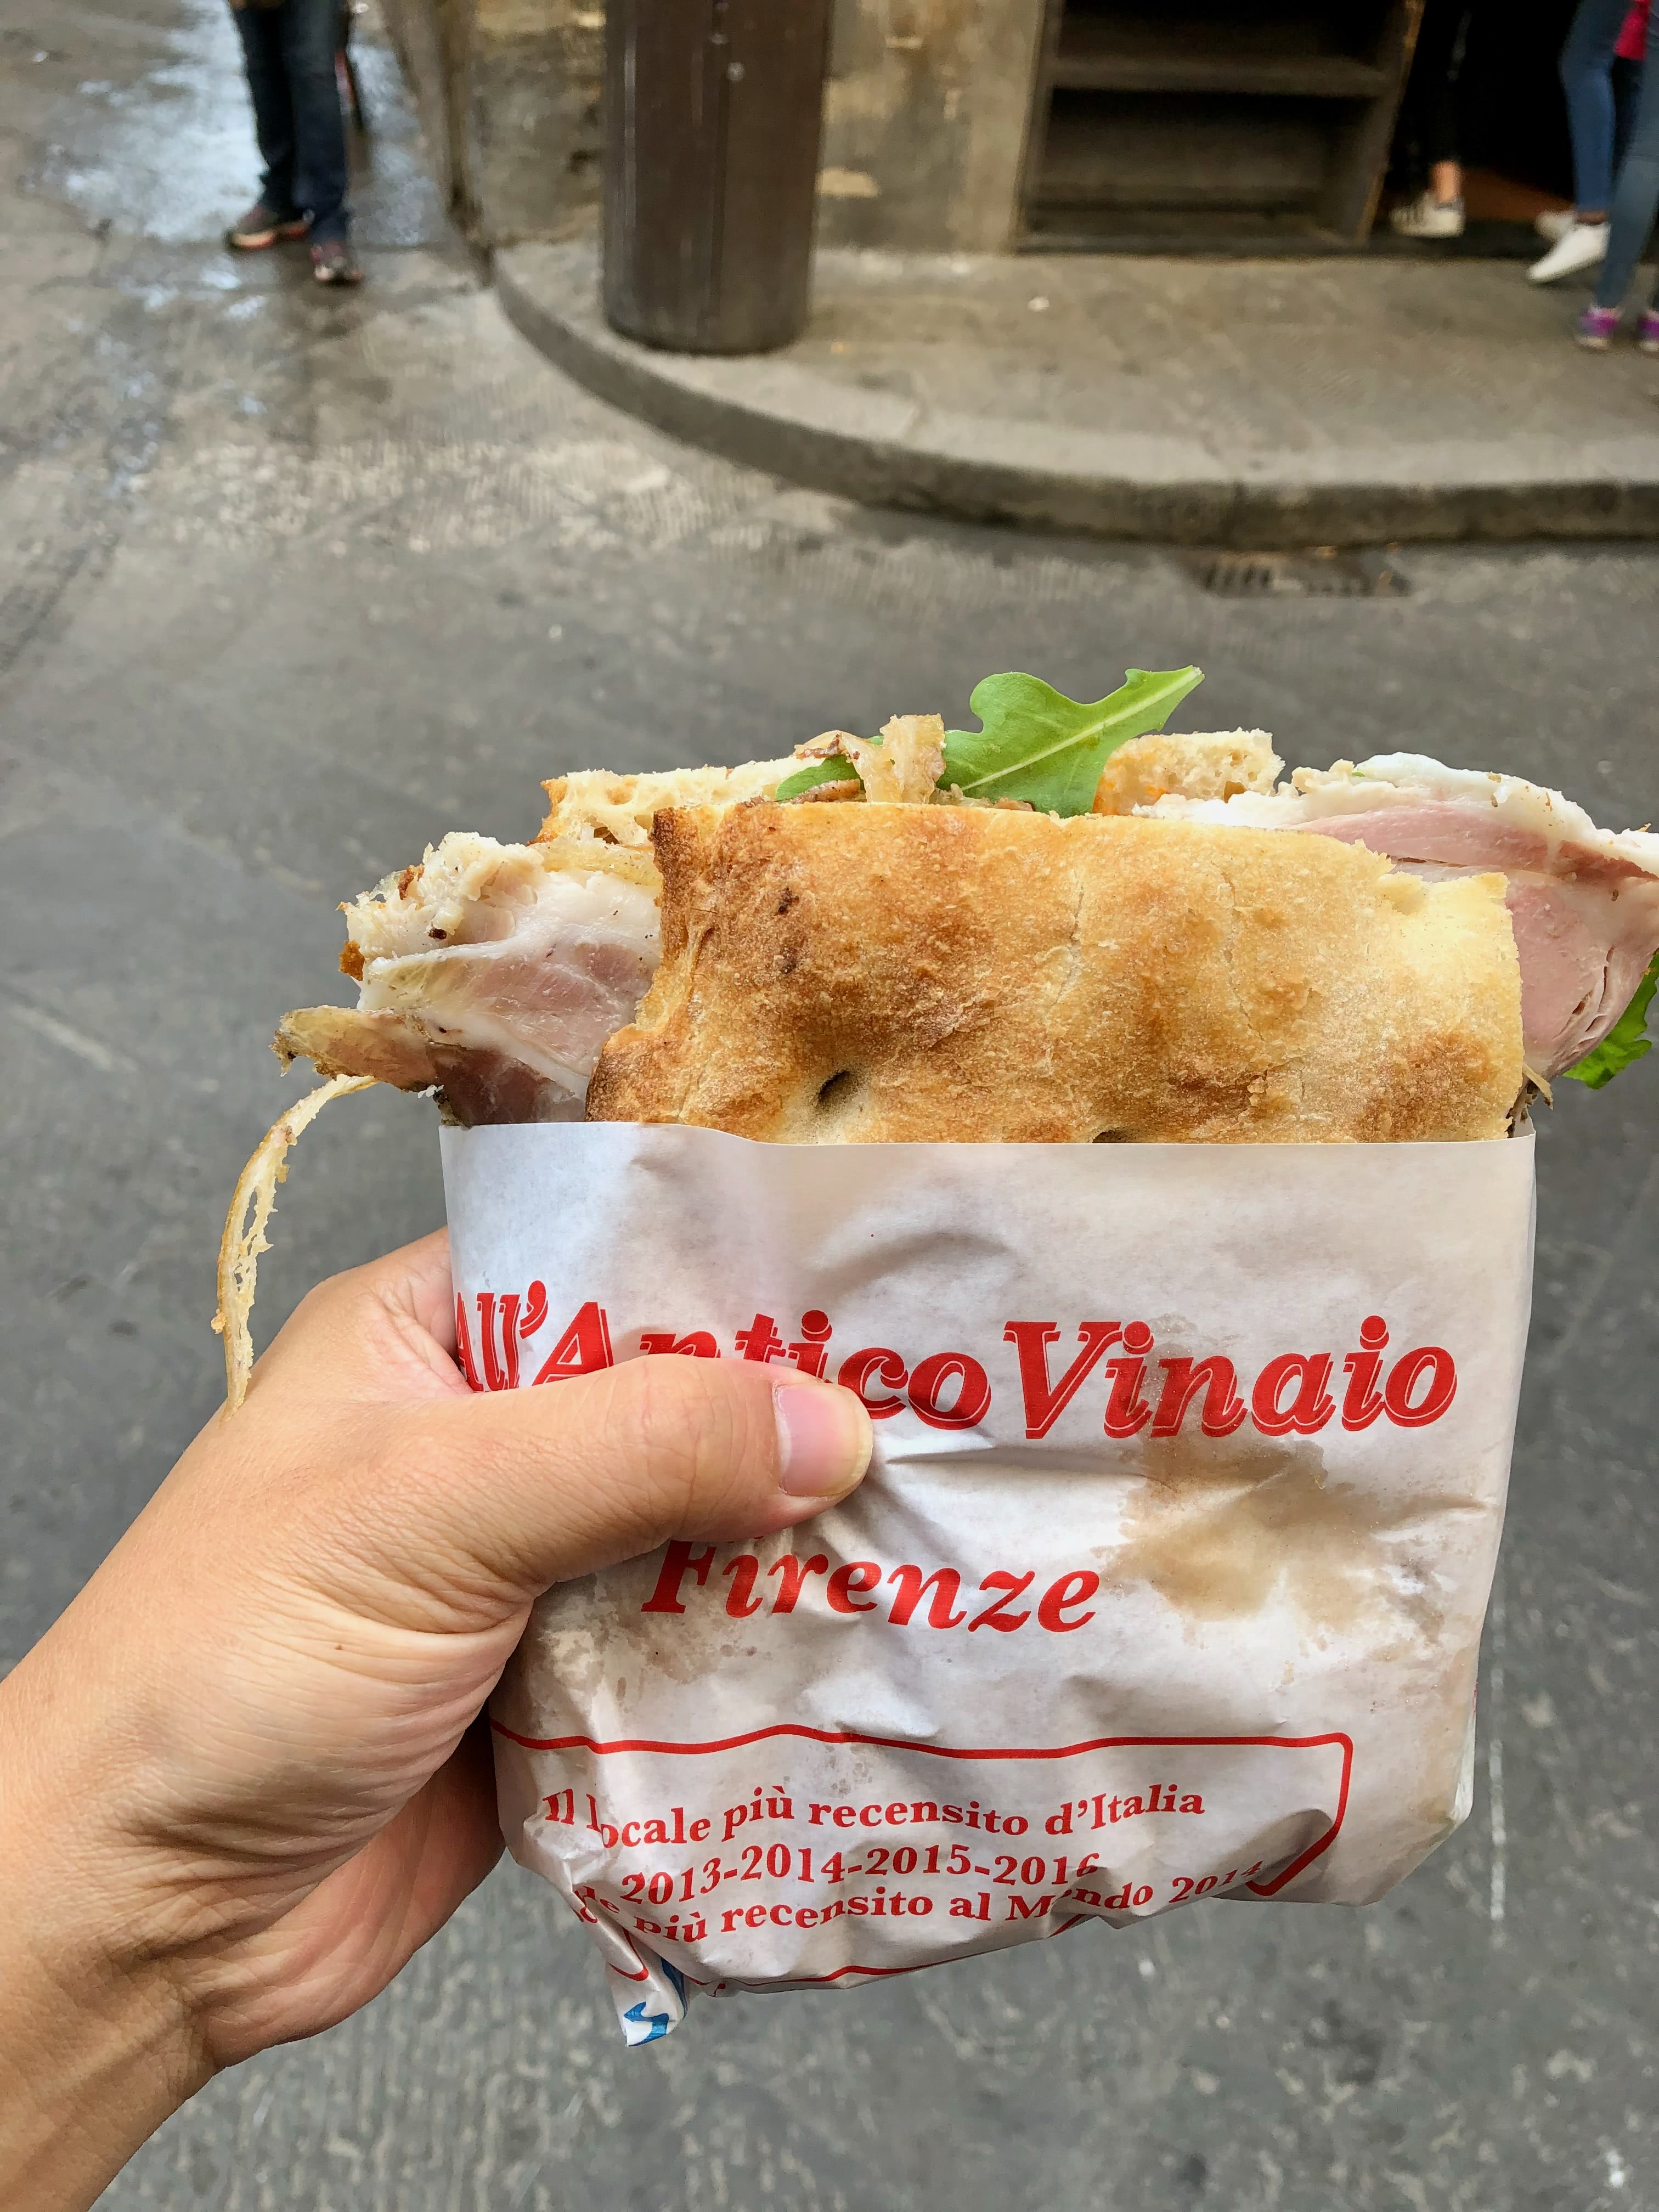 The best sandwich I ever had from Antico Vinaio